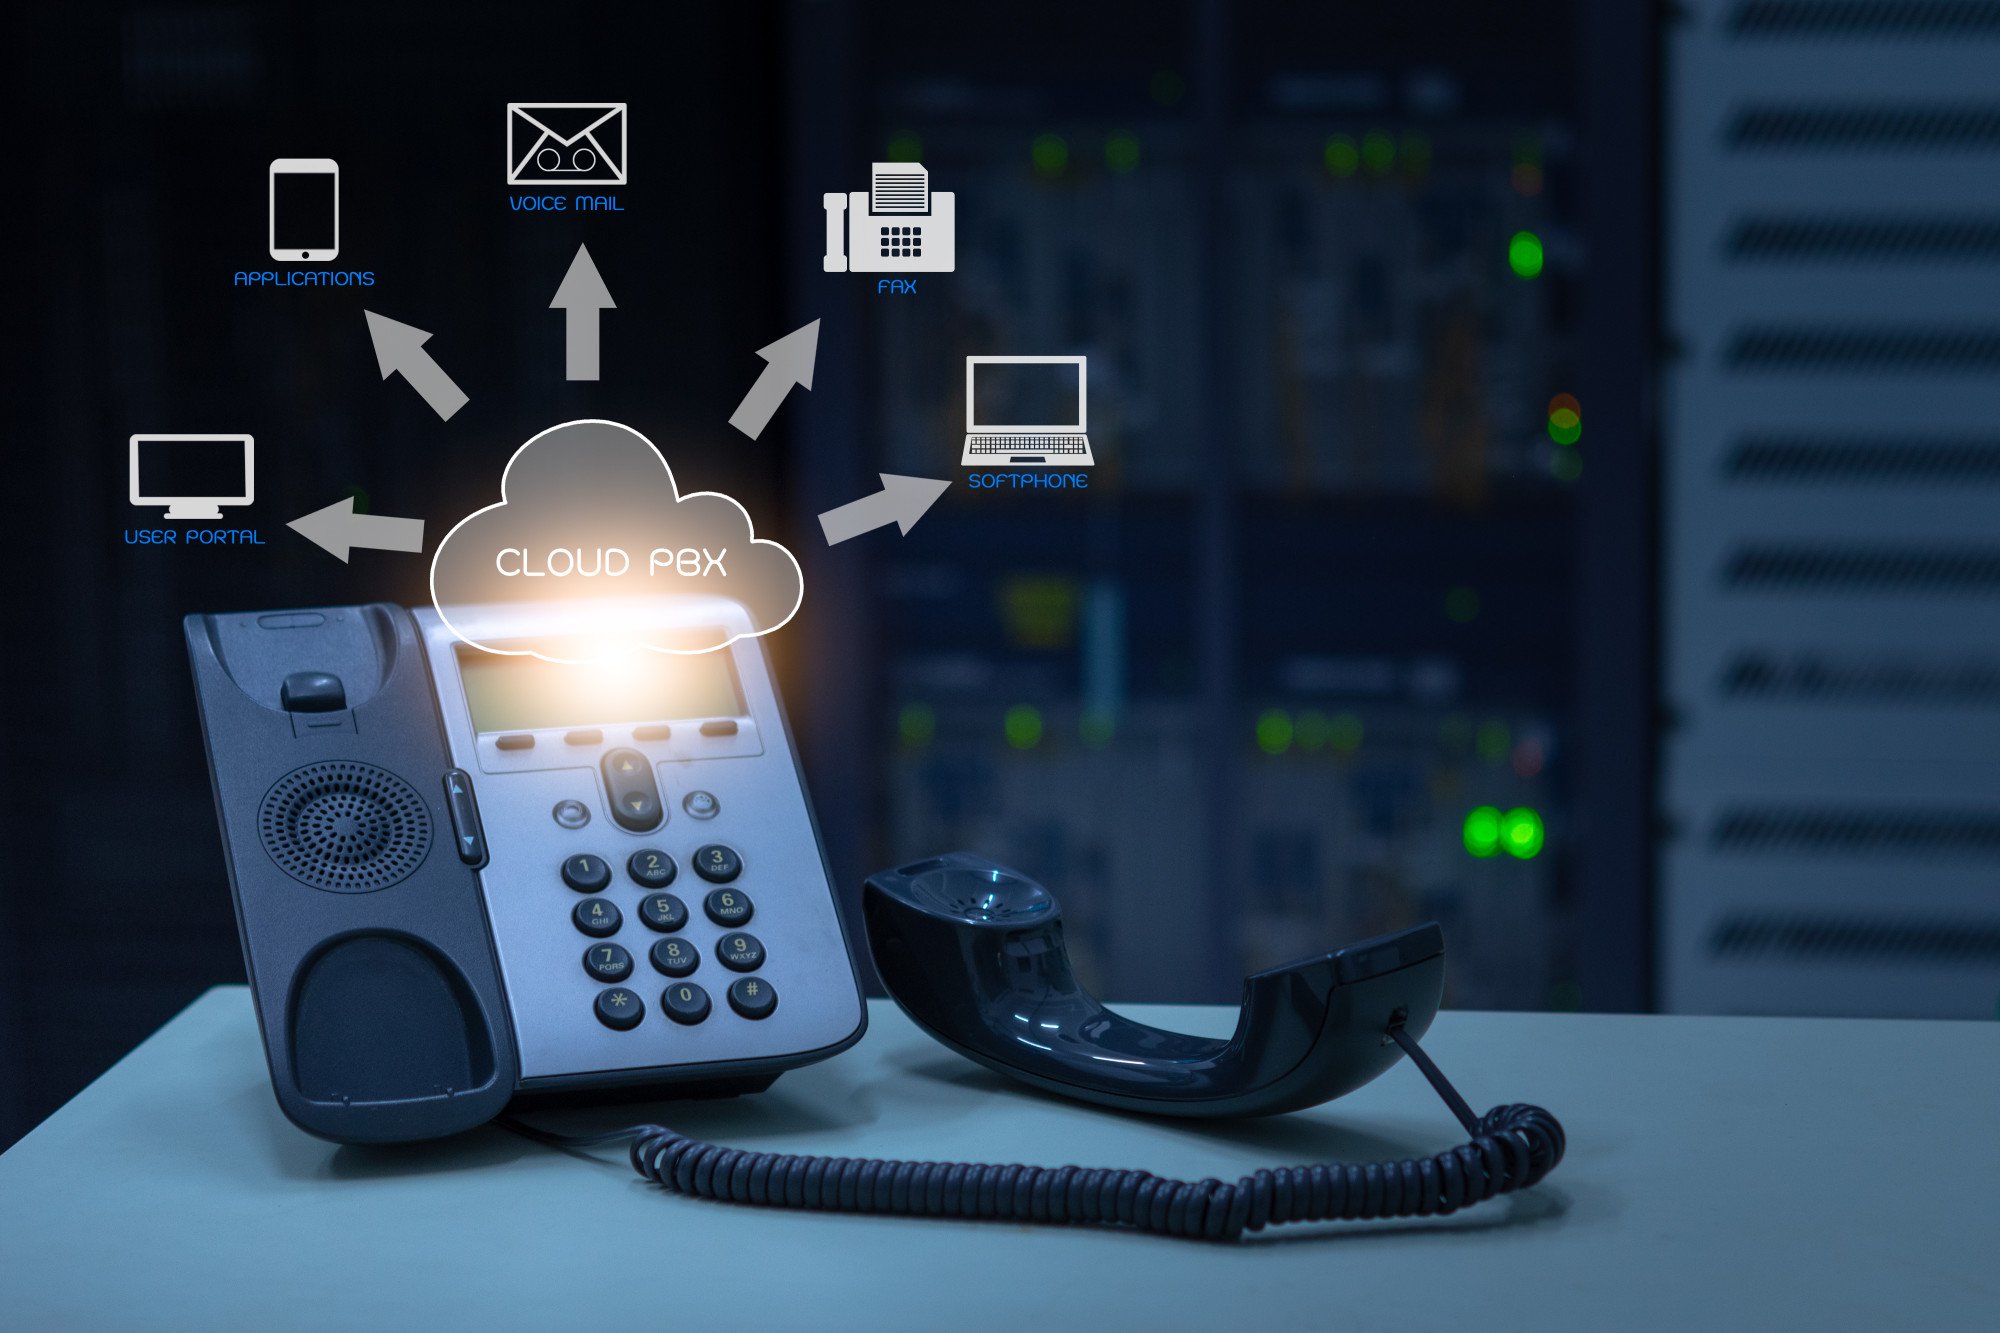 ip phone systems for small business